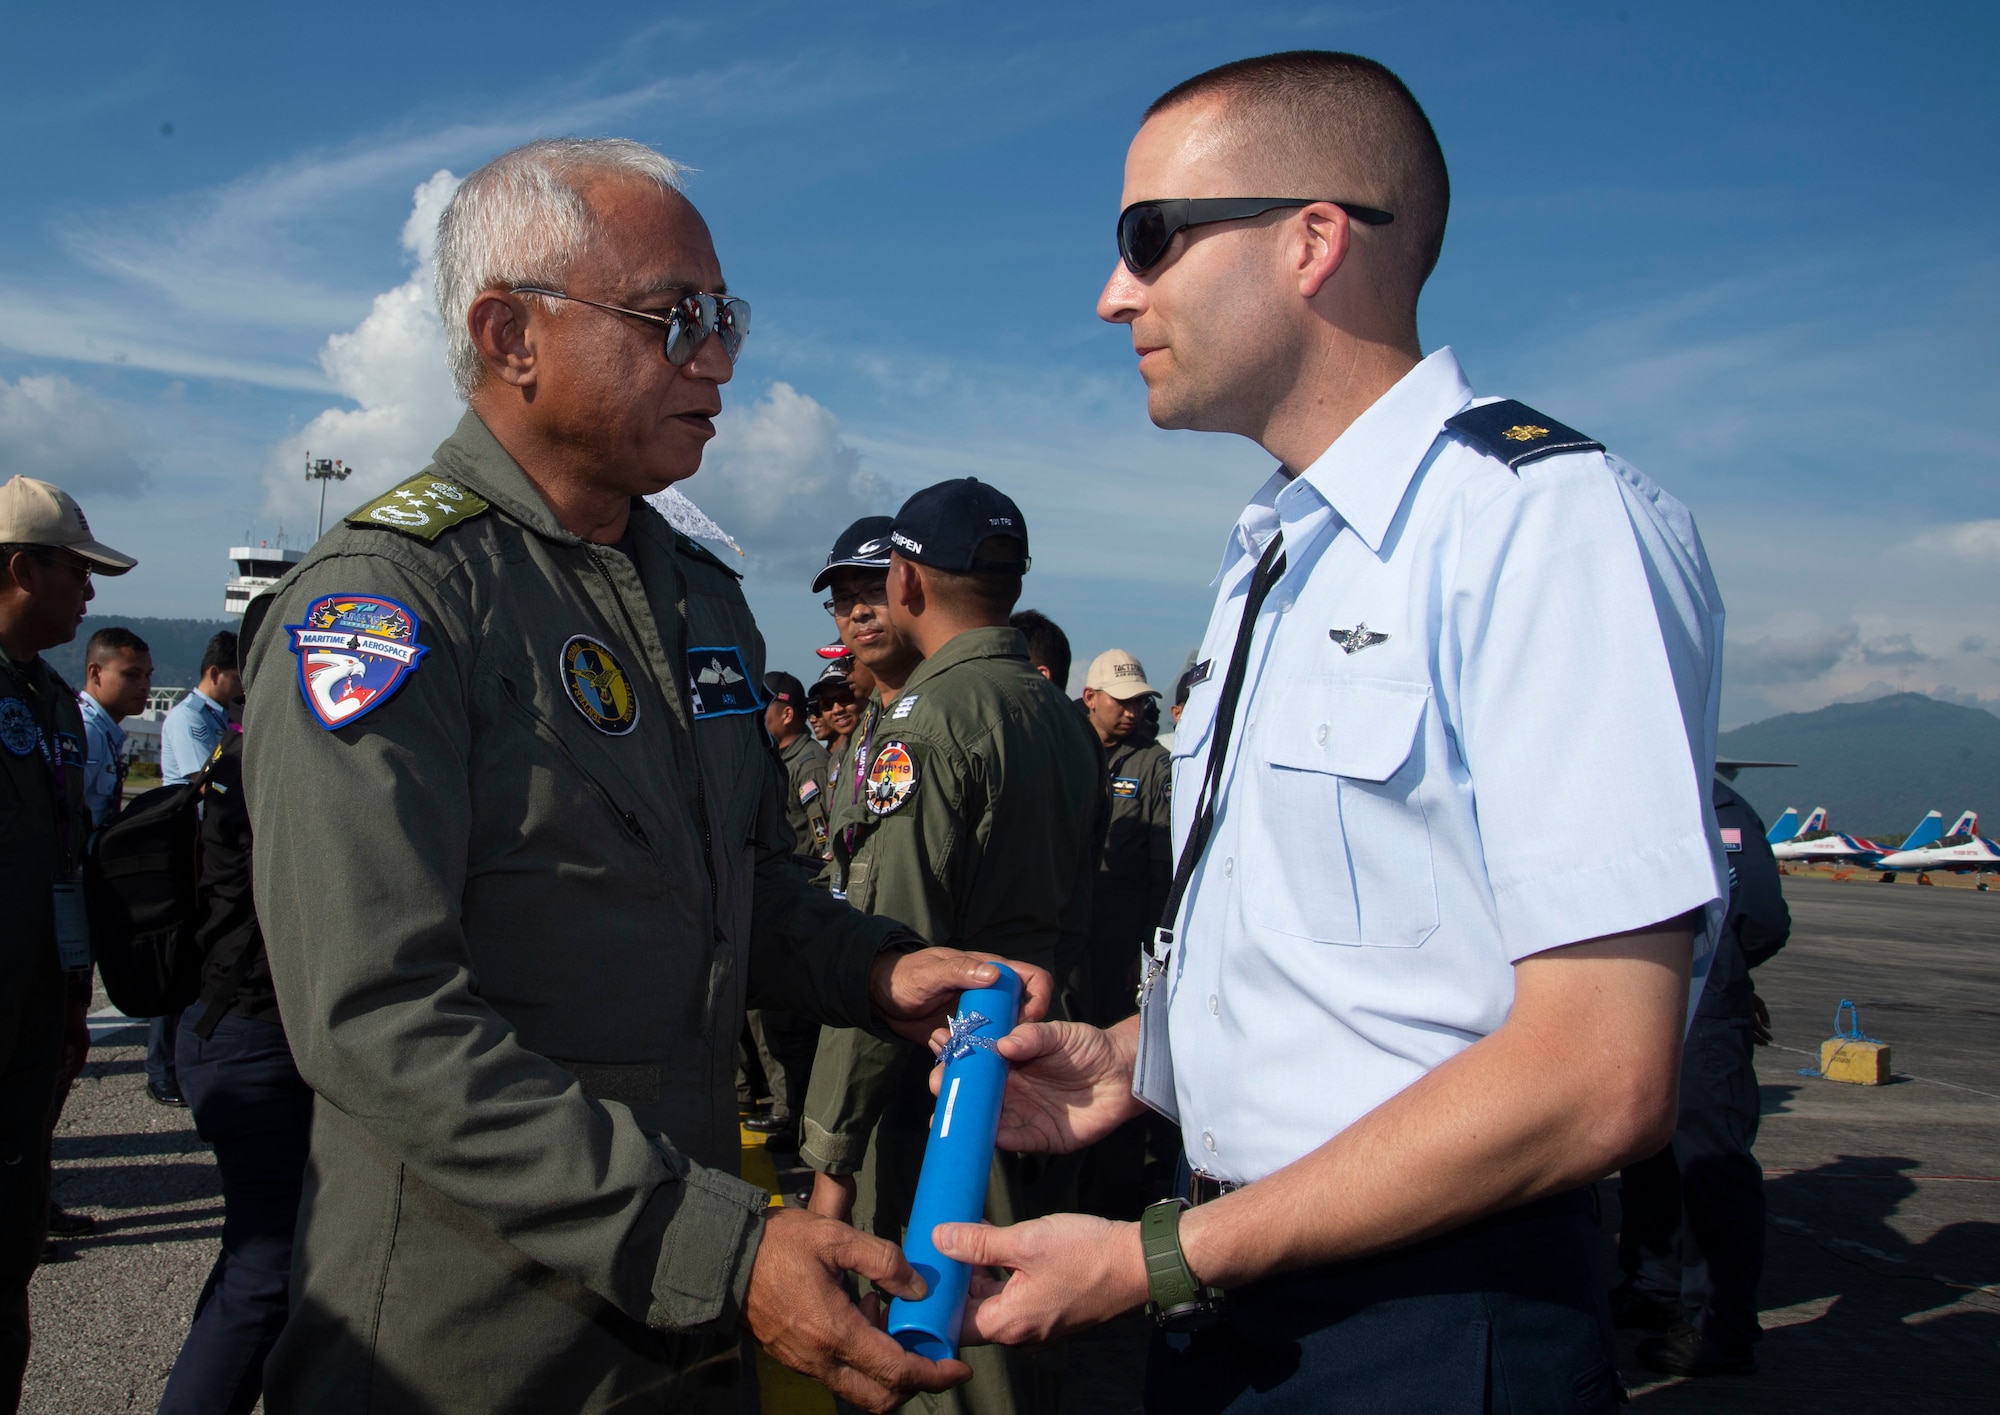 Malaysian Gen. Tan Sri Affendi Buang, Royal Malaysian Air Force chief, gives a certificate to U.S. Air Force Maj. Eric Myatt, assigned to U.S. Pacific Air Forces, Joint Base Pearl Harbor-Hickam, Hawaii, during an appreciation ceremony at the Langkawi International Maritime and Aerospace Exhibition 2019 in Padang Mat Sirat, Malaysia, March 29, 2019.